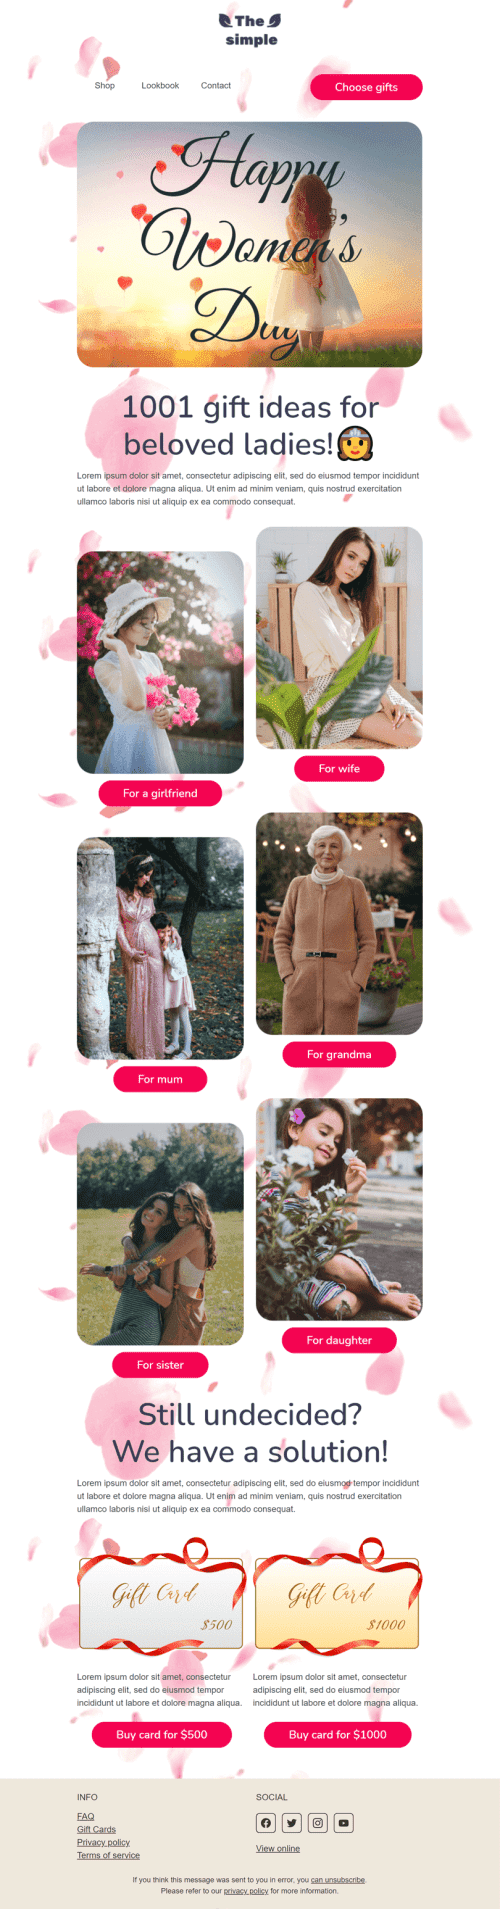 Women's Day Email Template «1001 gift ideas for beloved ladies» for Fashion industry desktop view